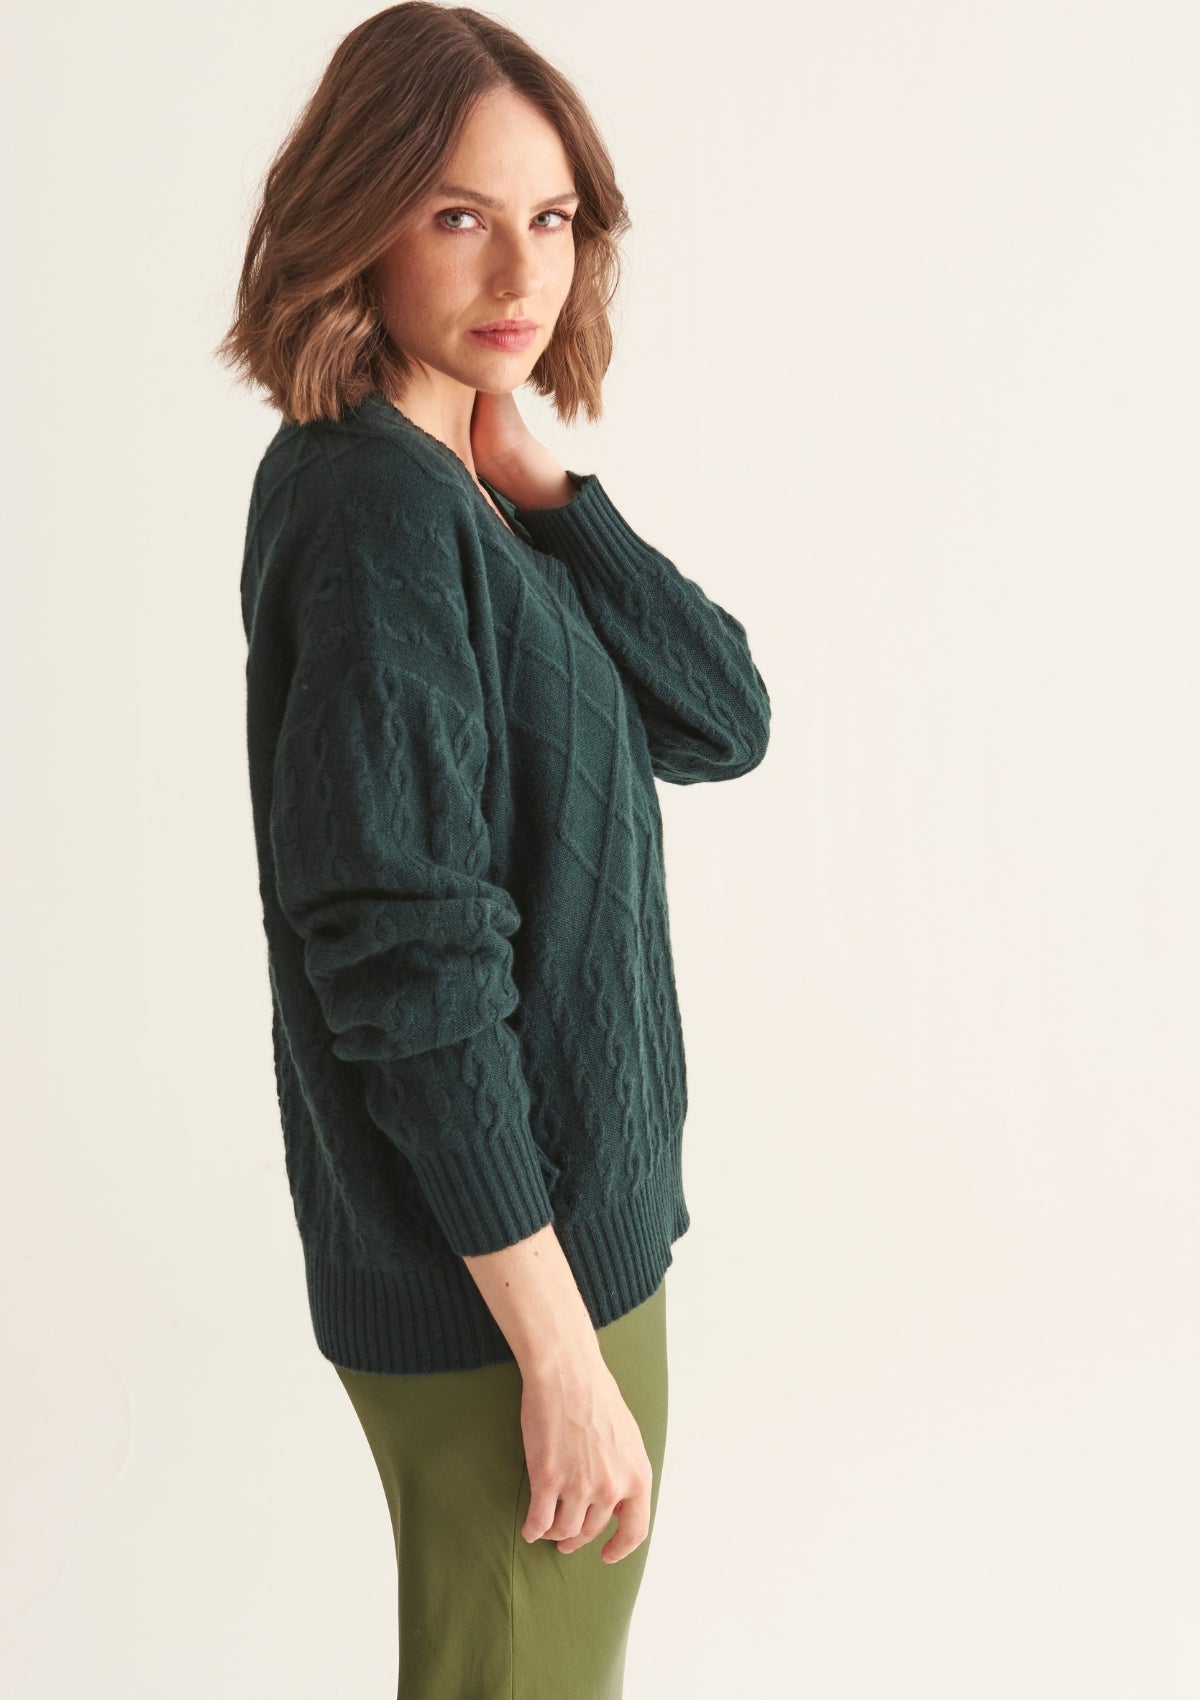 Ribbed Trim Cable Cashmere V Neck Sweater in Bottle Green